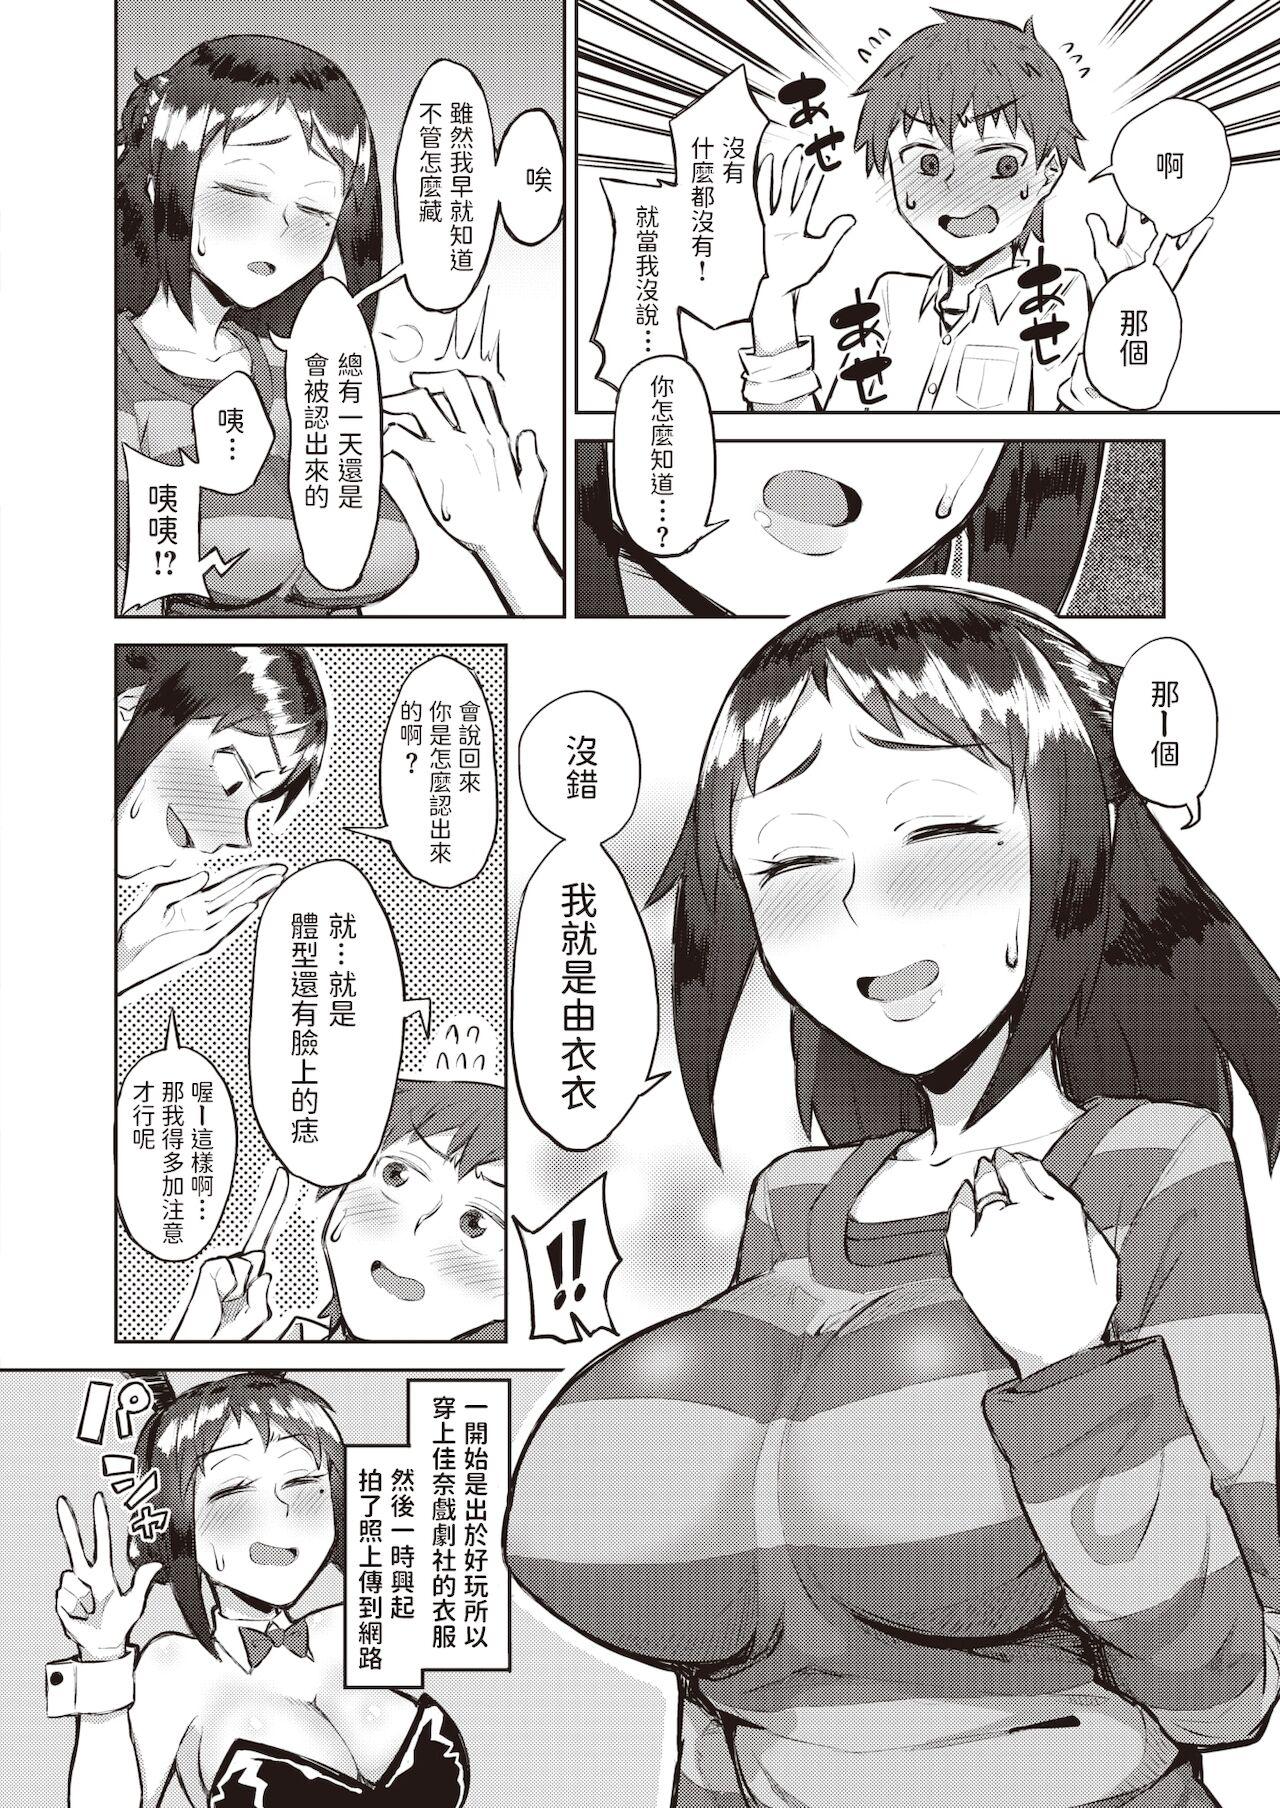 Foreplay [悪天候] るっくあっとみー (COMIC 失楽天 2019年12月号) 中文翻譯 Twink - Page 6